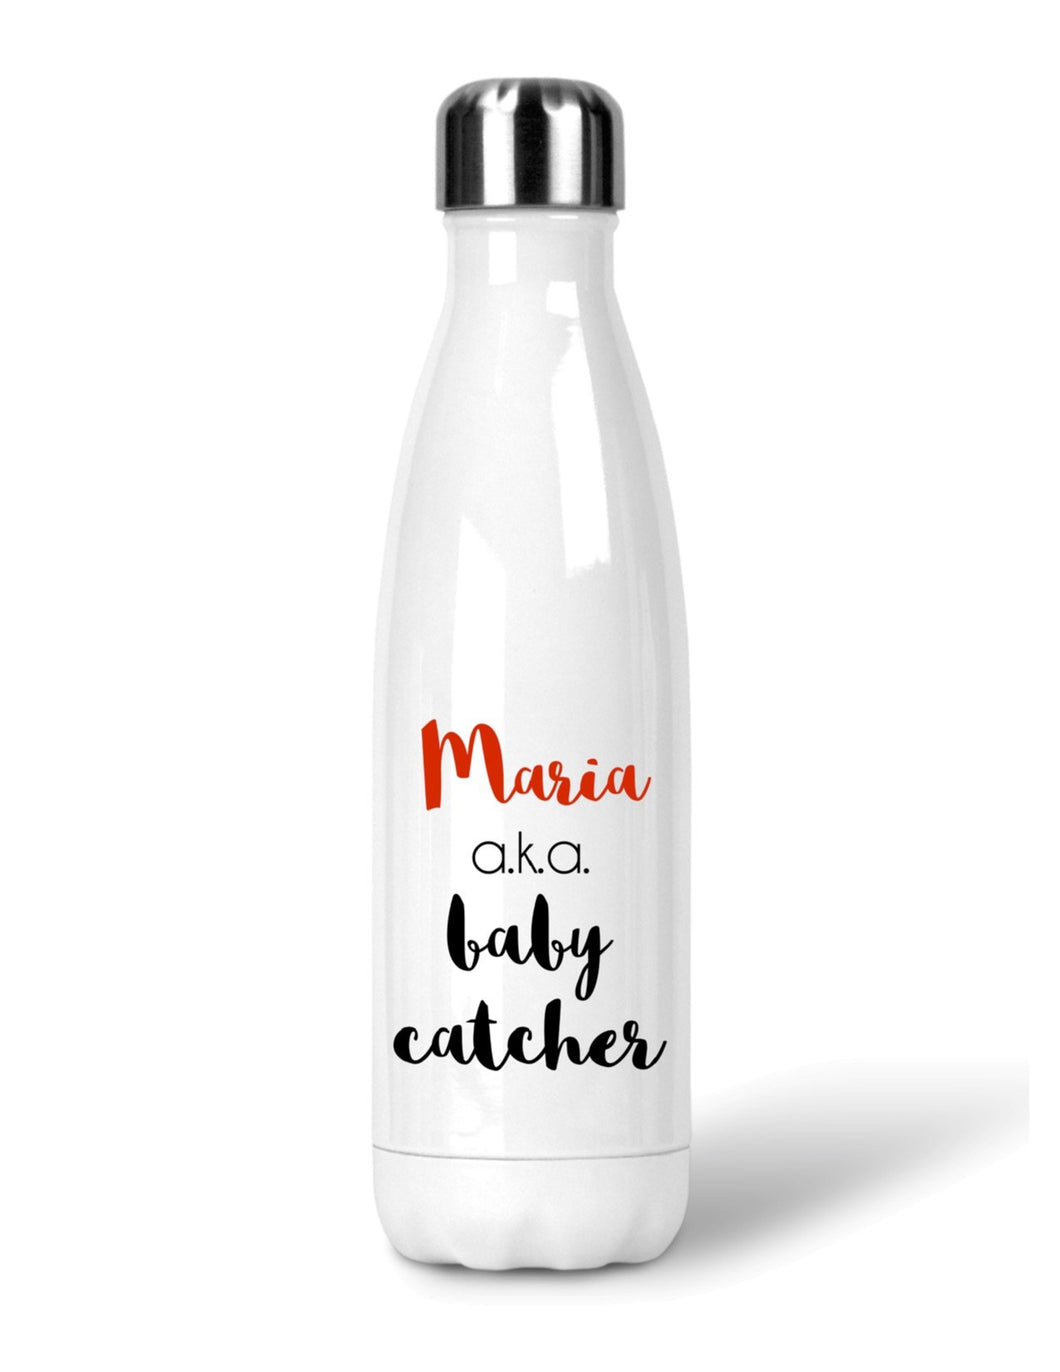 Midwife/OBGYN Baby Catcher Thermal Water Bottle